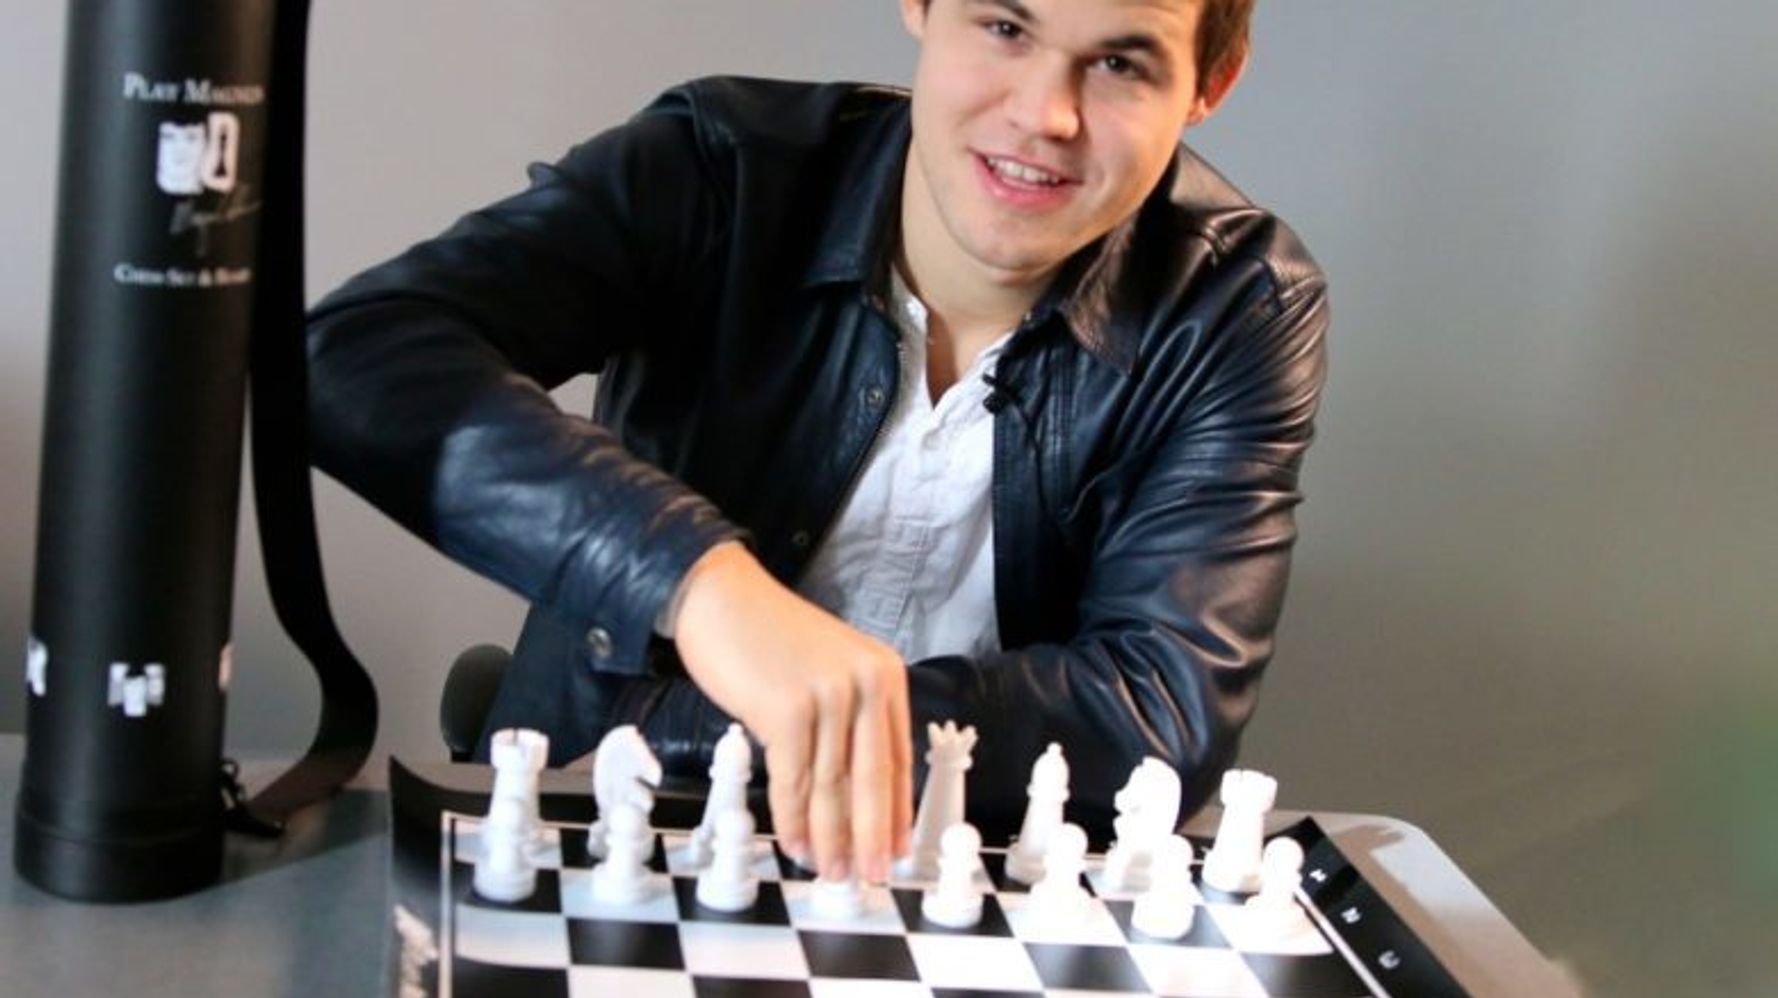 Magnus Carlsen Chess Training on Play Magnus App: How to Play the Opening 